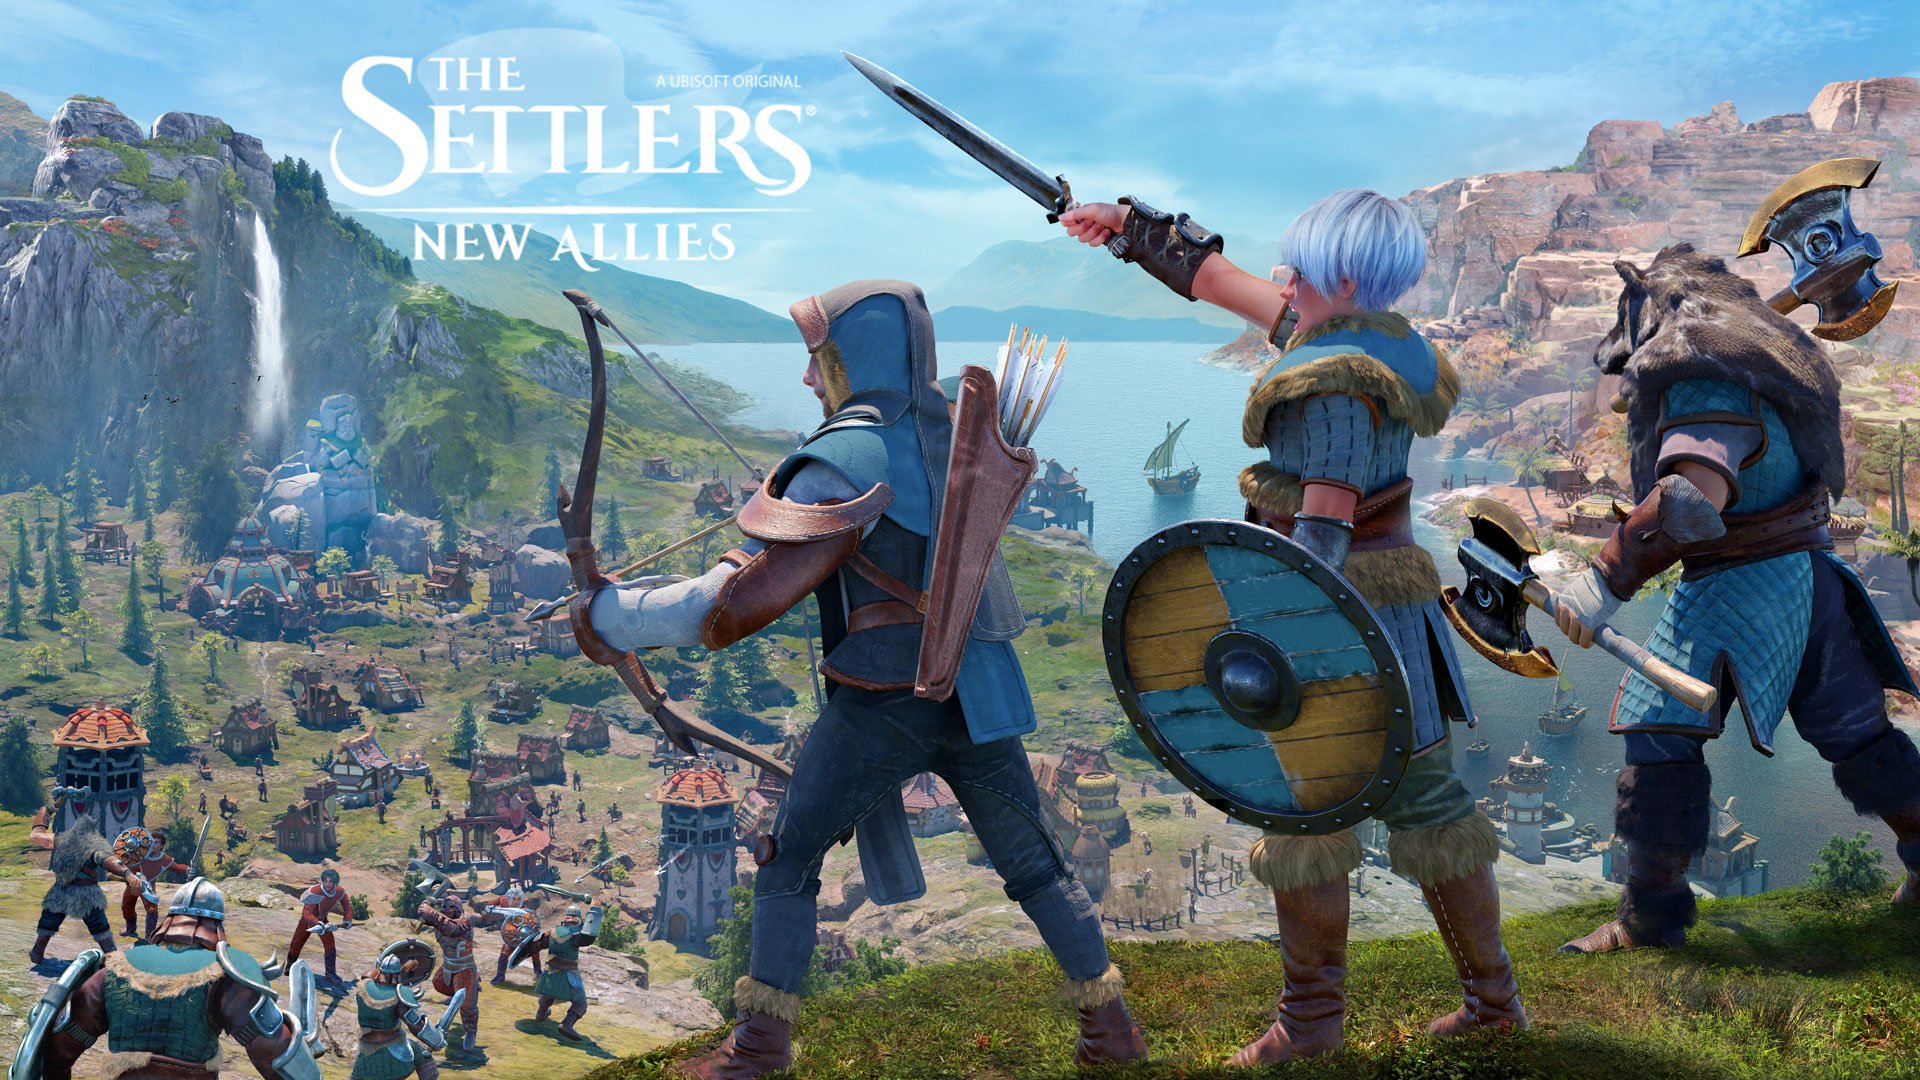 The Settlers: New Allies launches February 17, 2023 for PC, later for PS4, Xbox One, Switch, and Luna - Gematsu